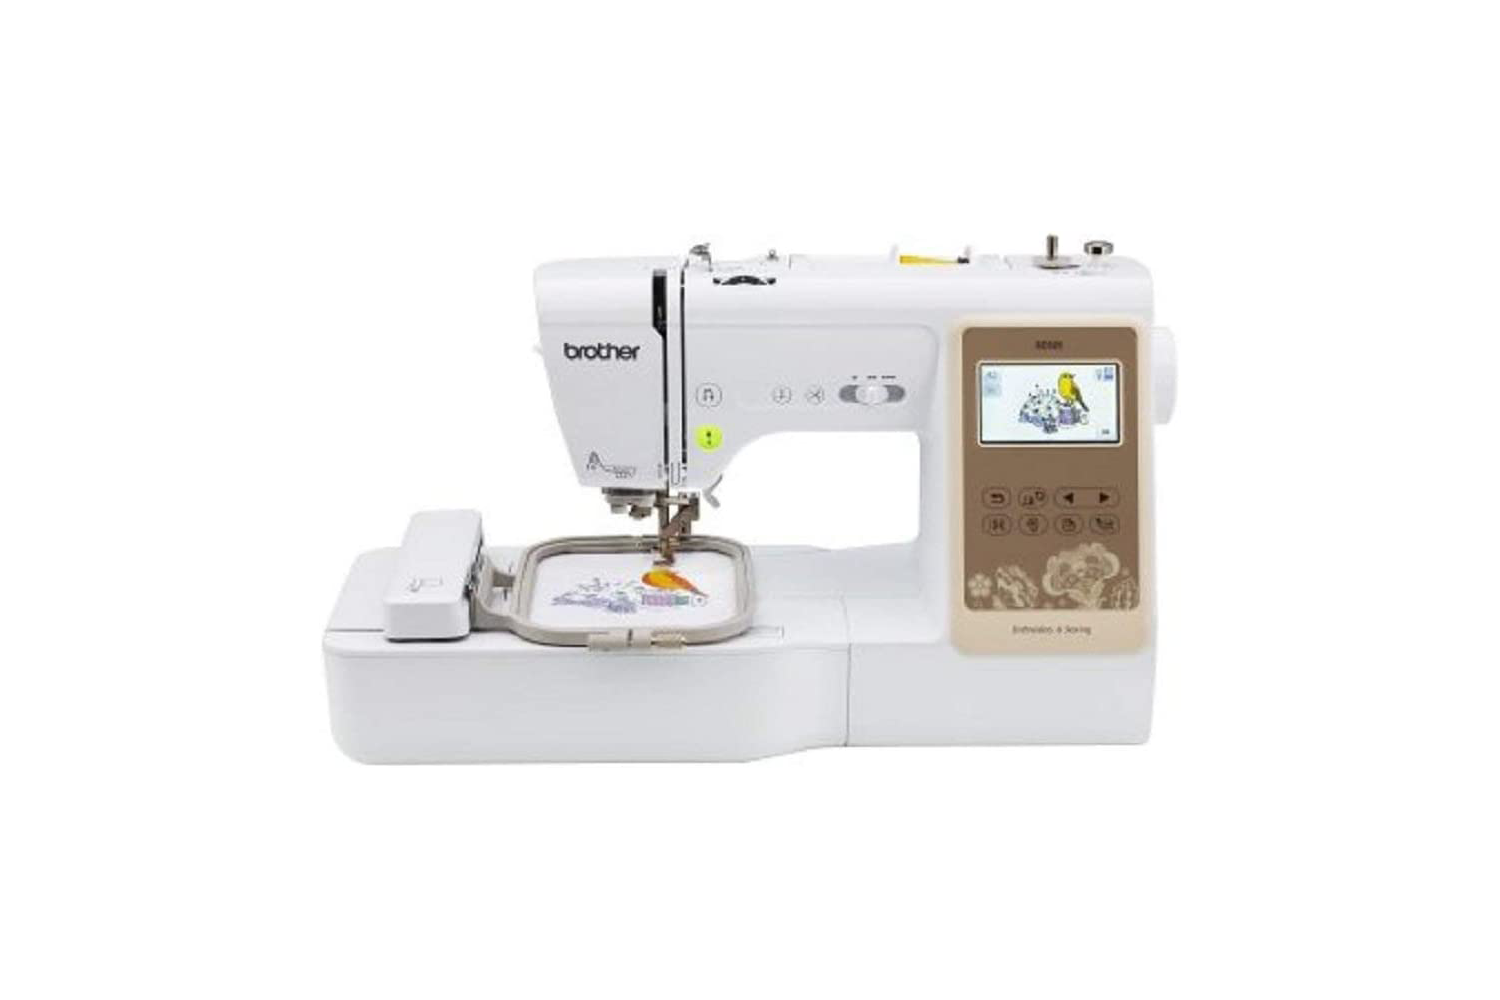 Brother Refurbished SE625 Sewing and Embroidery Machine 4x4 for Sale at World Weidner